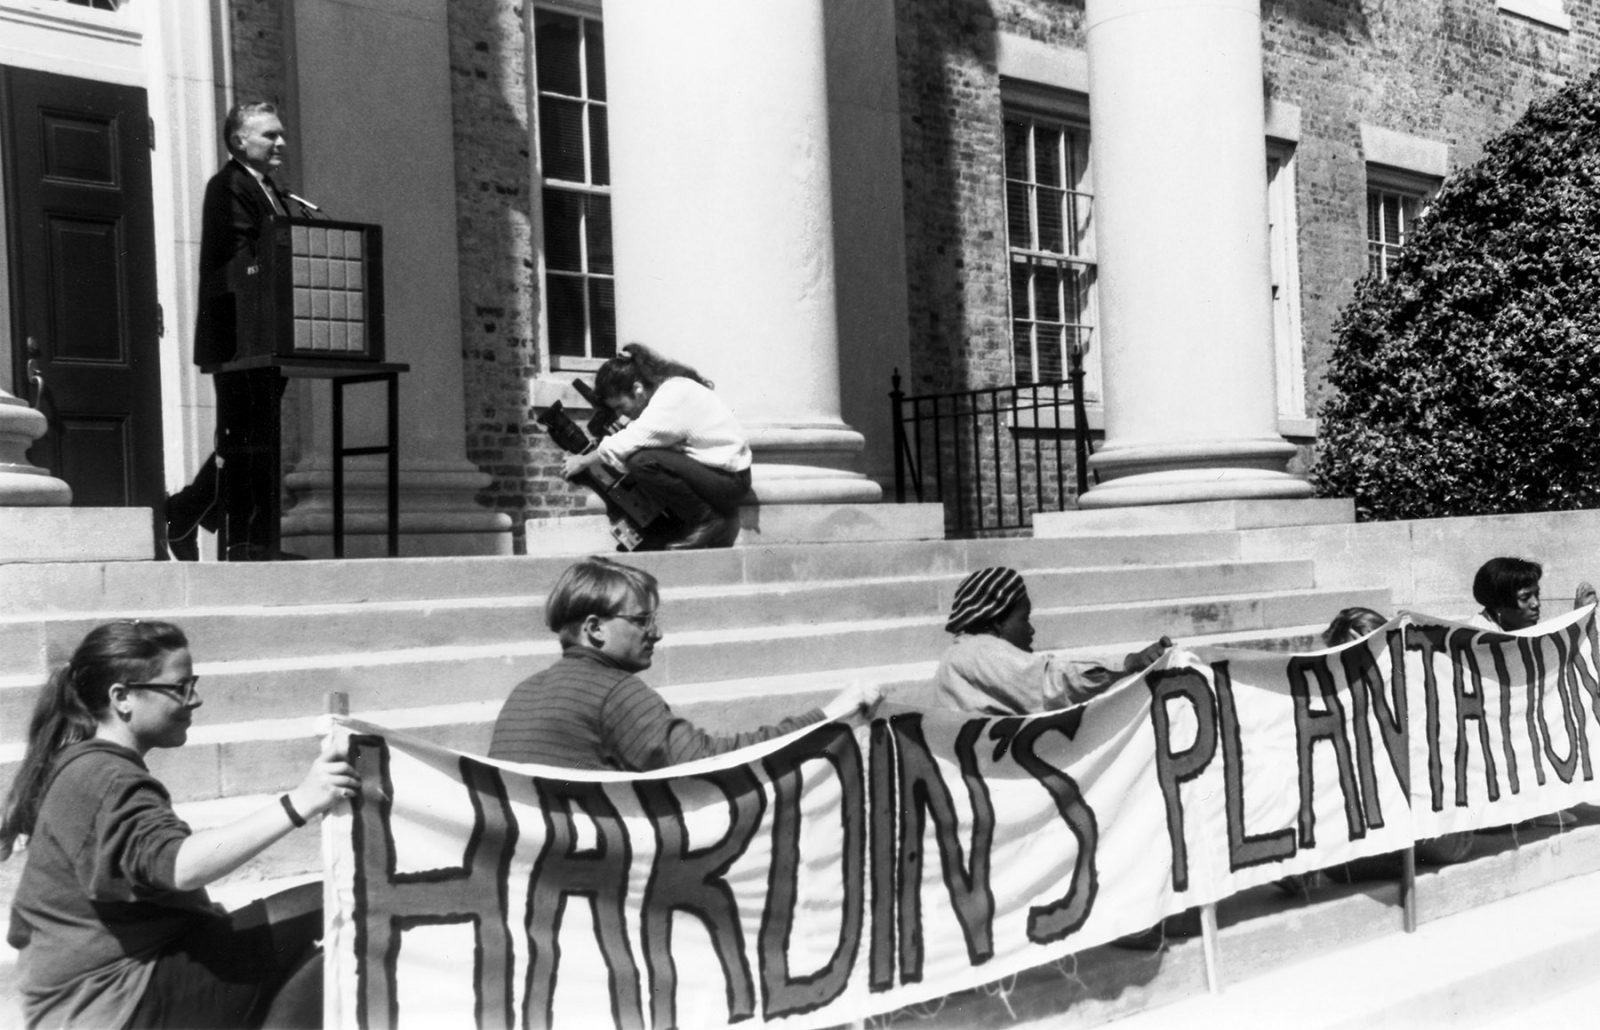 News cameras ably captured placards that read ‘Hardin’s Plantation’ but not the truth that Hardin felt inside — that he was in a lose-lose situation. (Yackety Yack 1993)